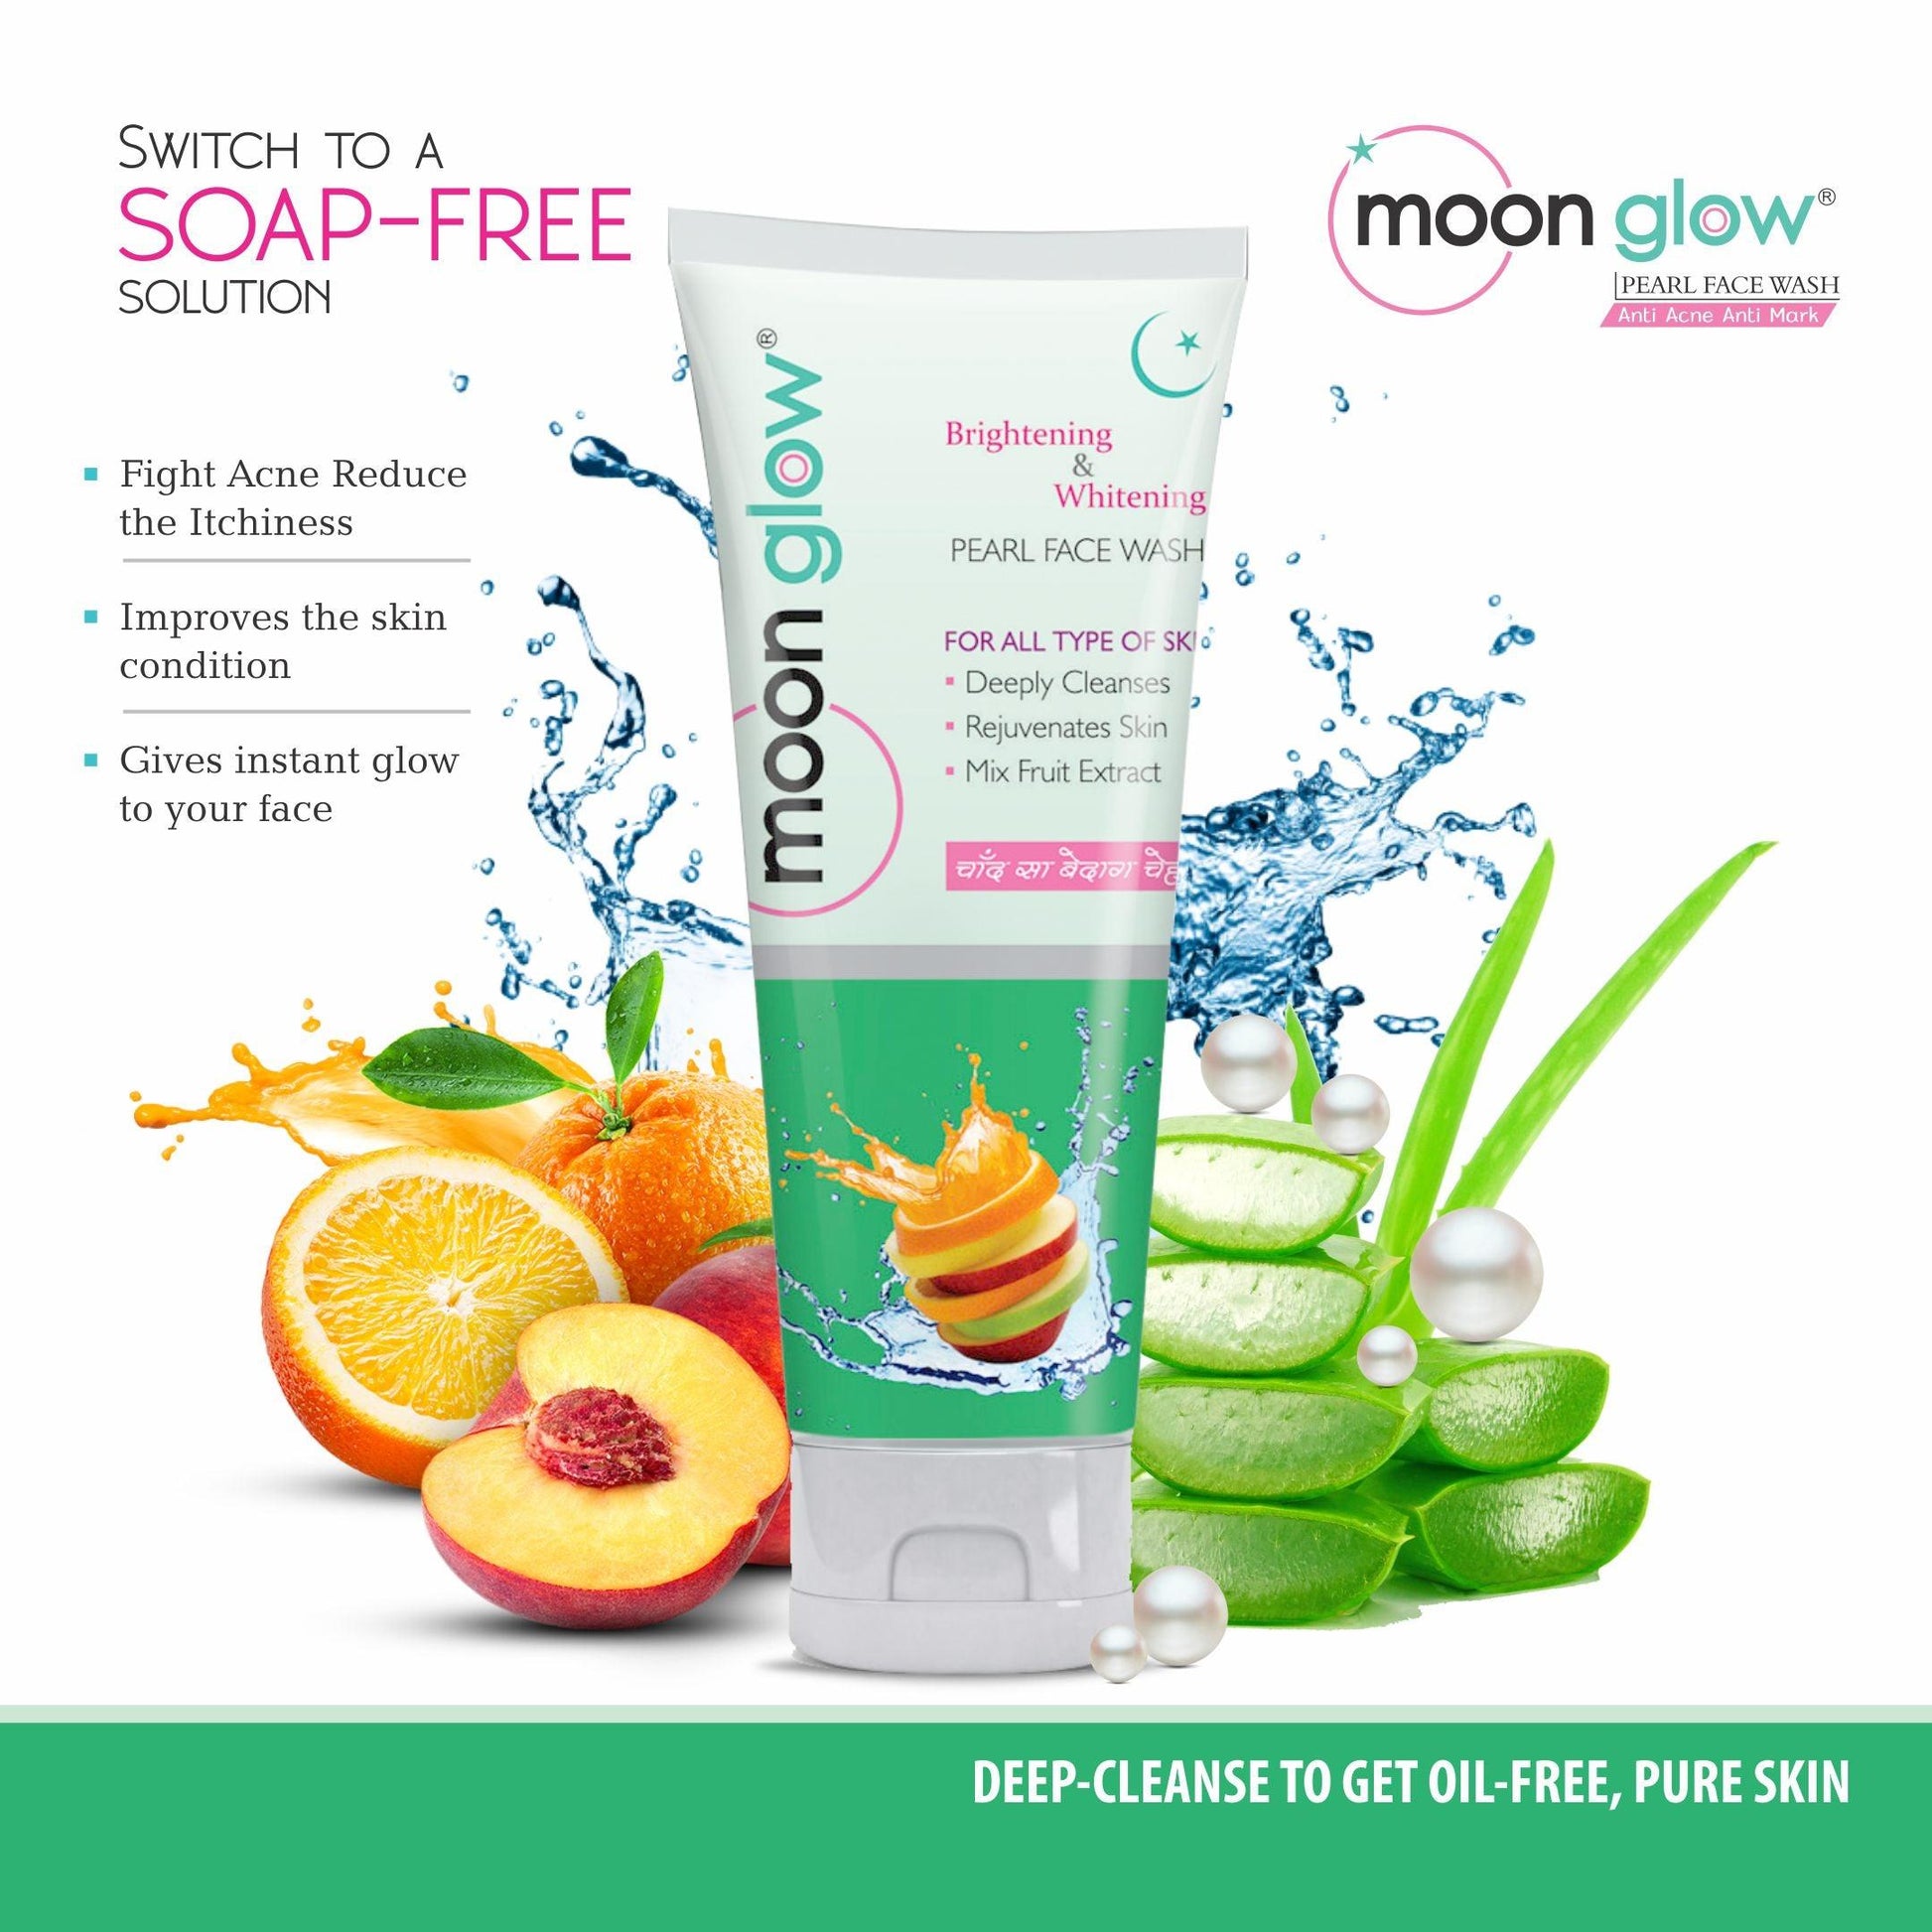 Moon Glow Cream & Pearl Face Wash for Acne, Pimples, Black Spots, Dark Circles, Stretch Marks, Anti-Aging and Fairness (2 Cream + 3 Pearl Face Wash) - Olefia Biopharma Limited